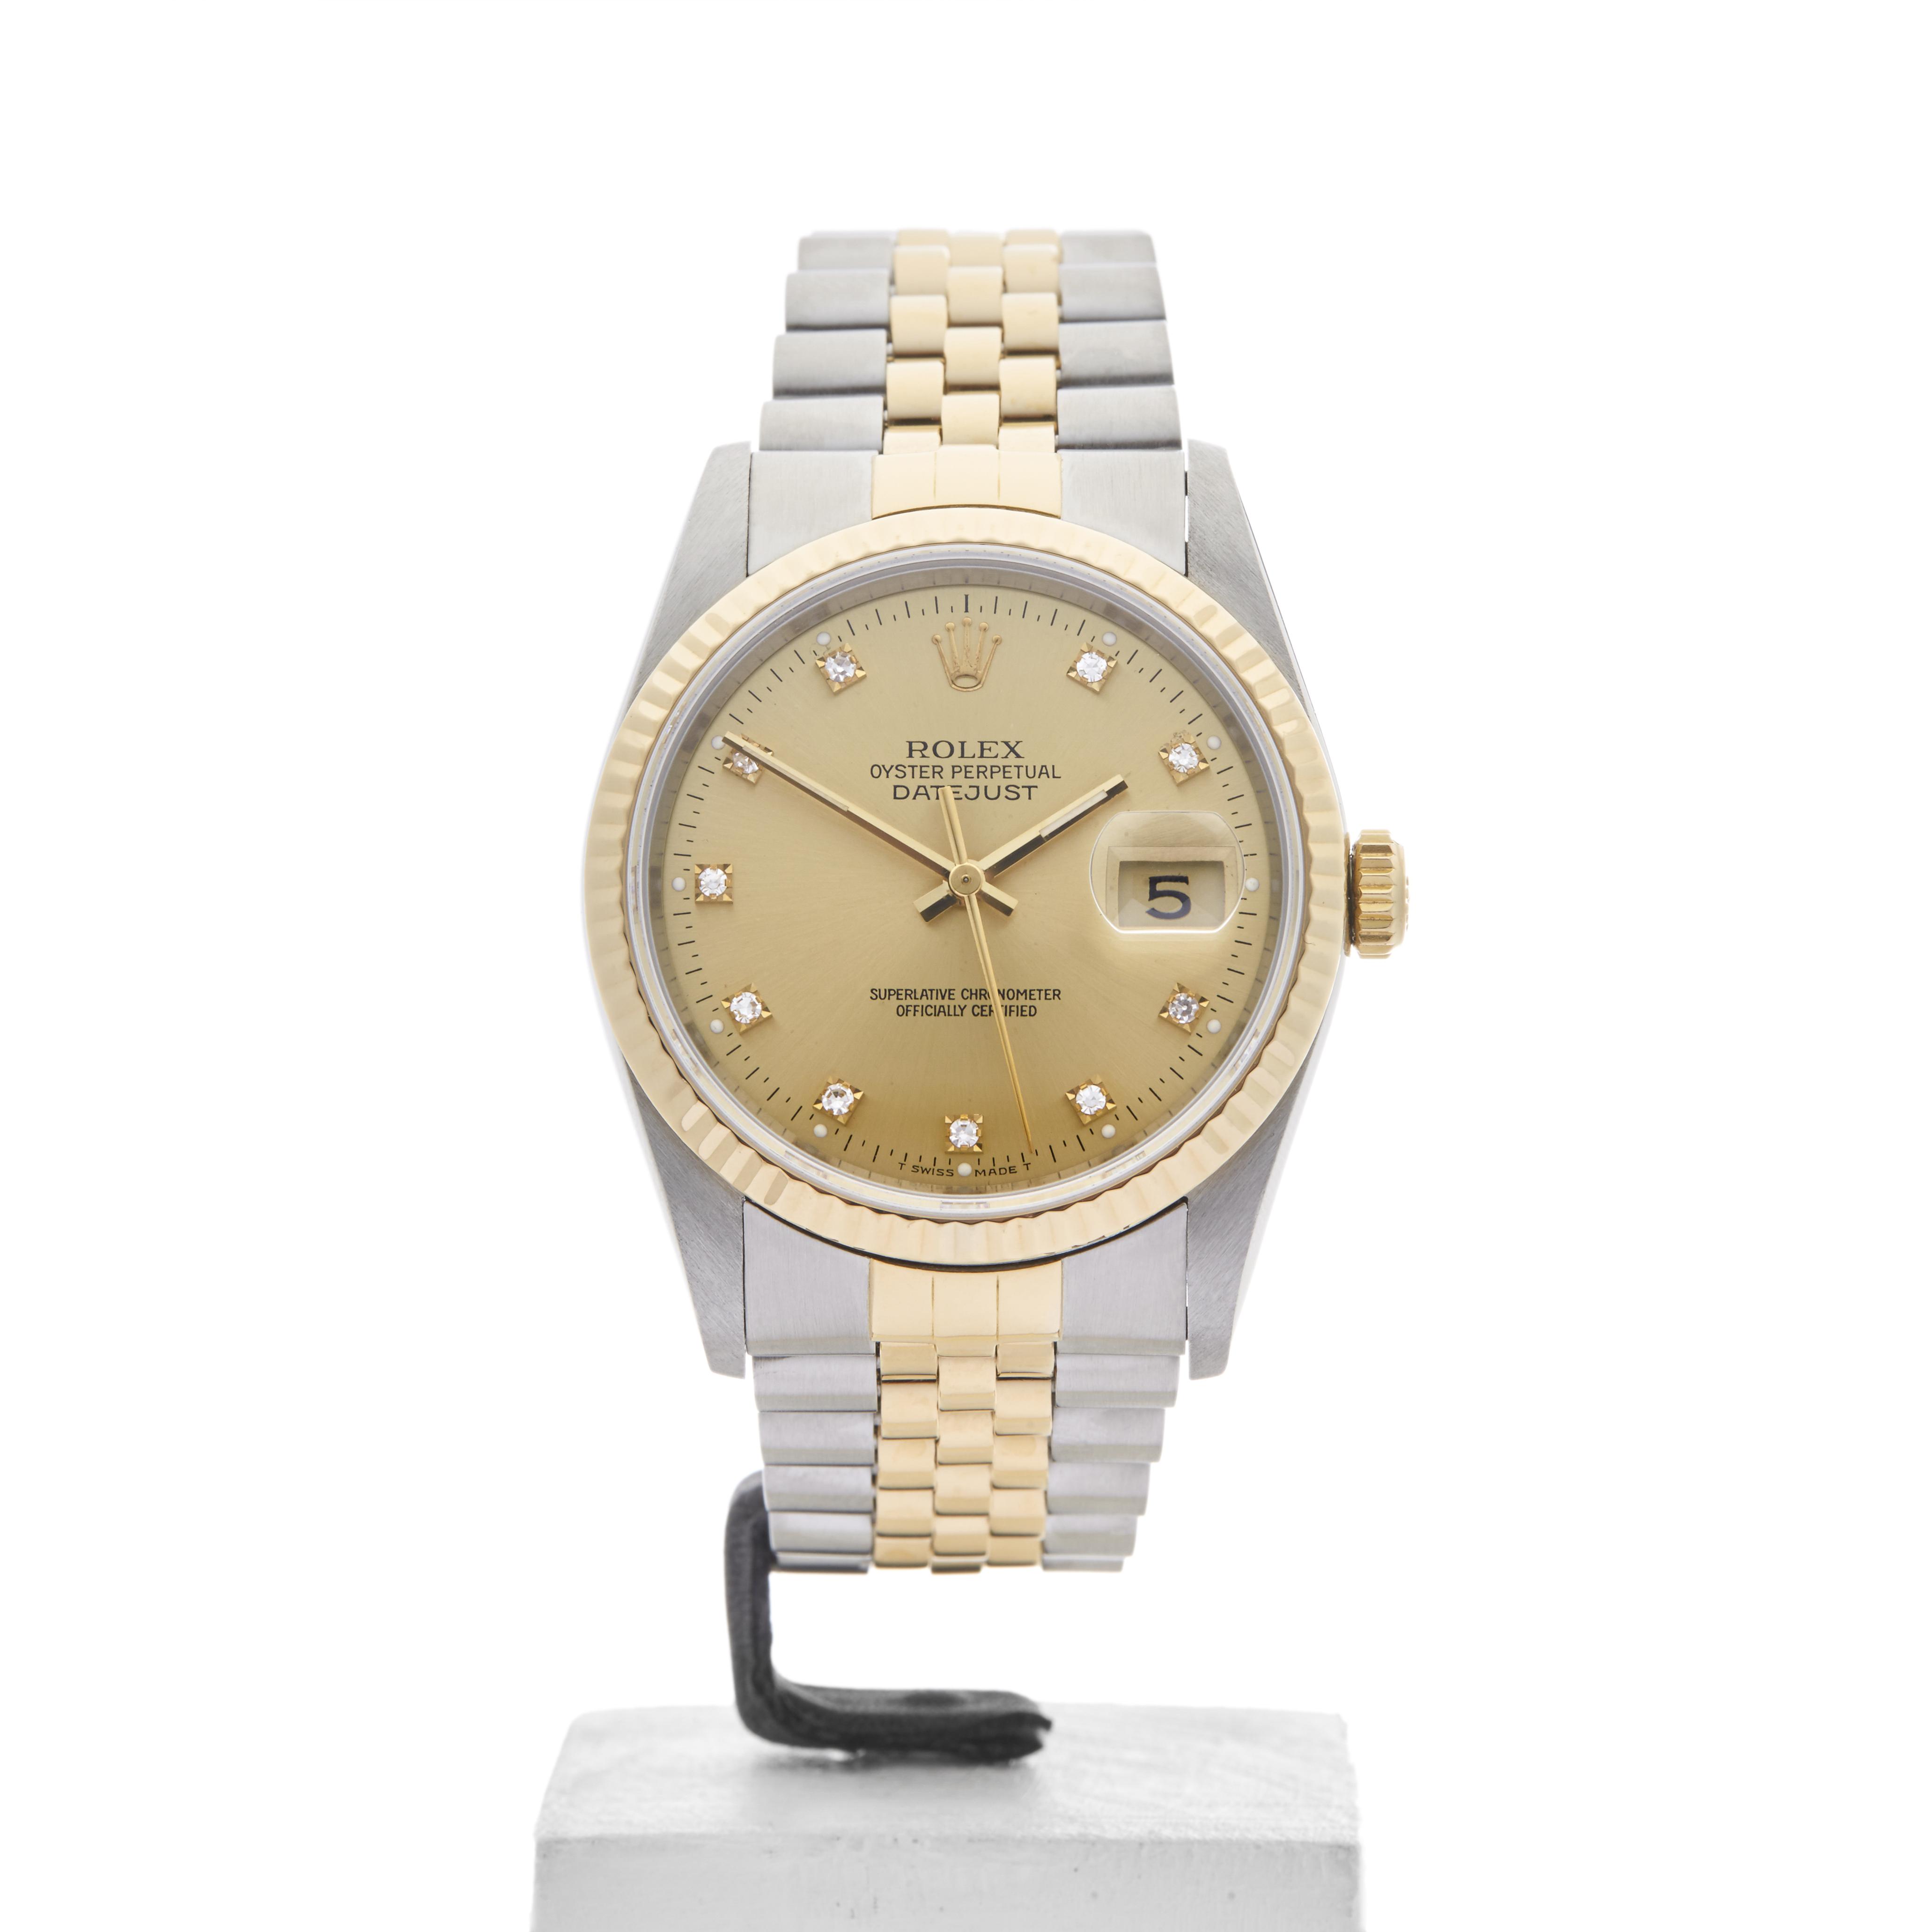 Rolex Datejust 36mm Stainless Steel & 18k Yellow Gold 16233 - Image 10 of 23